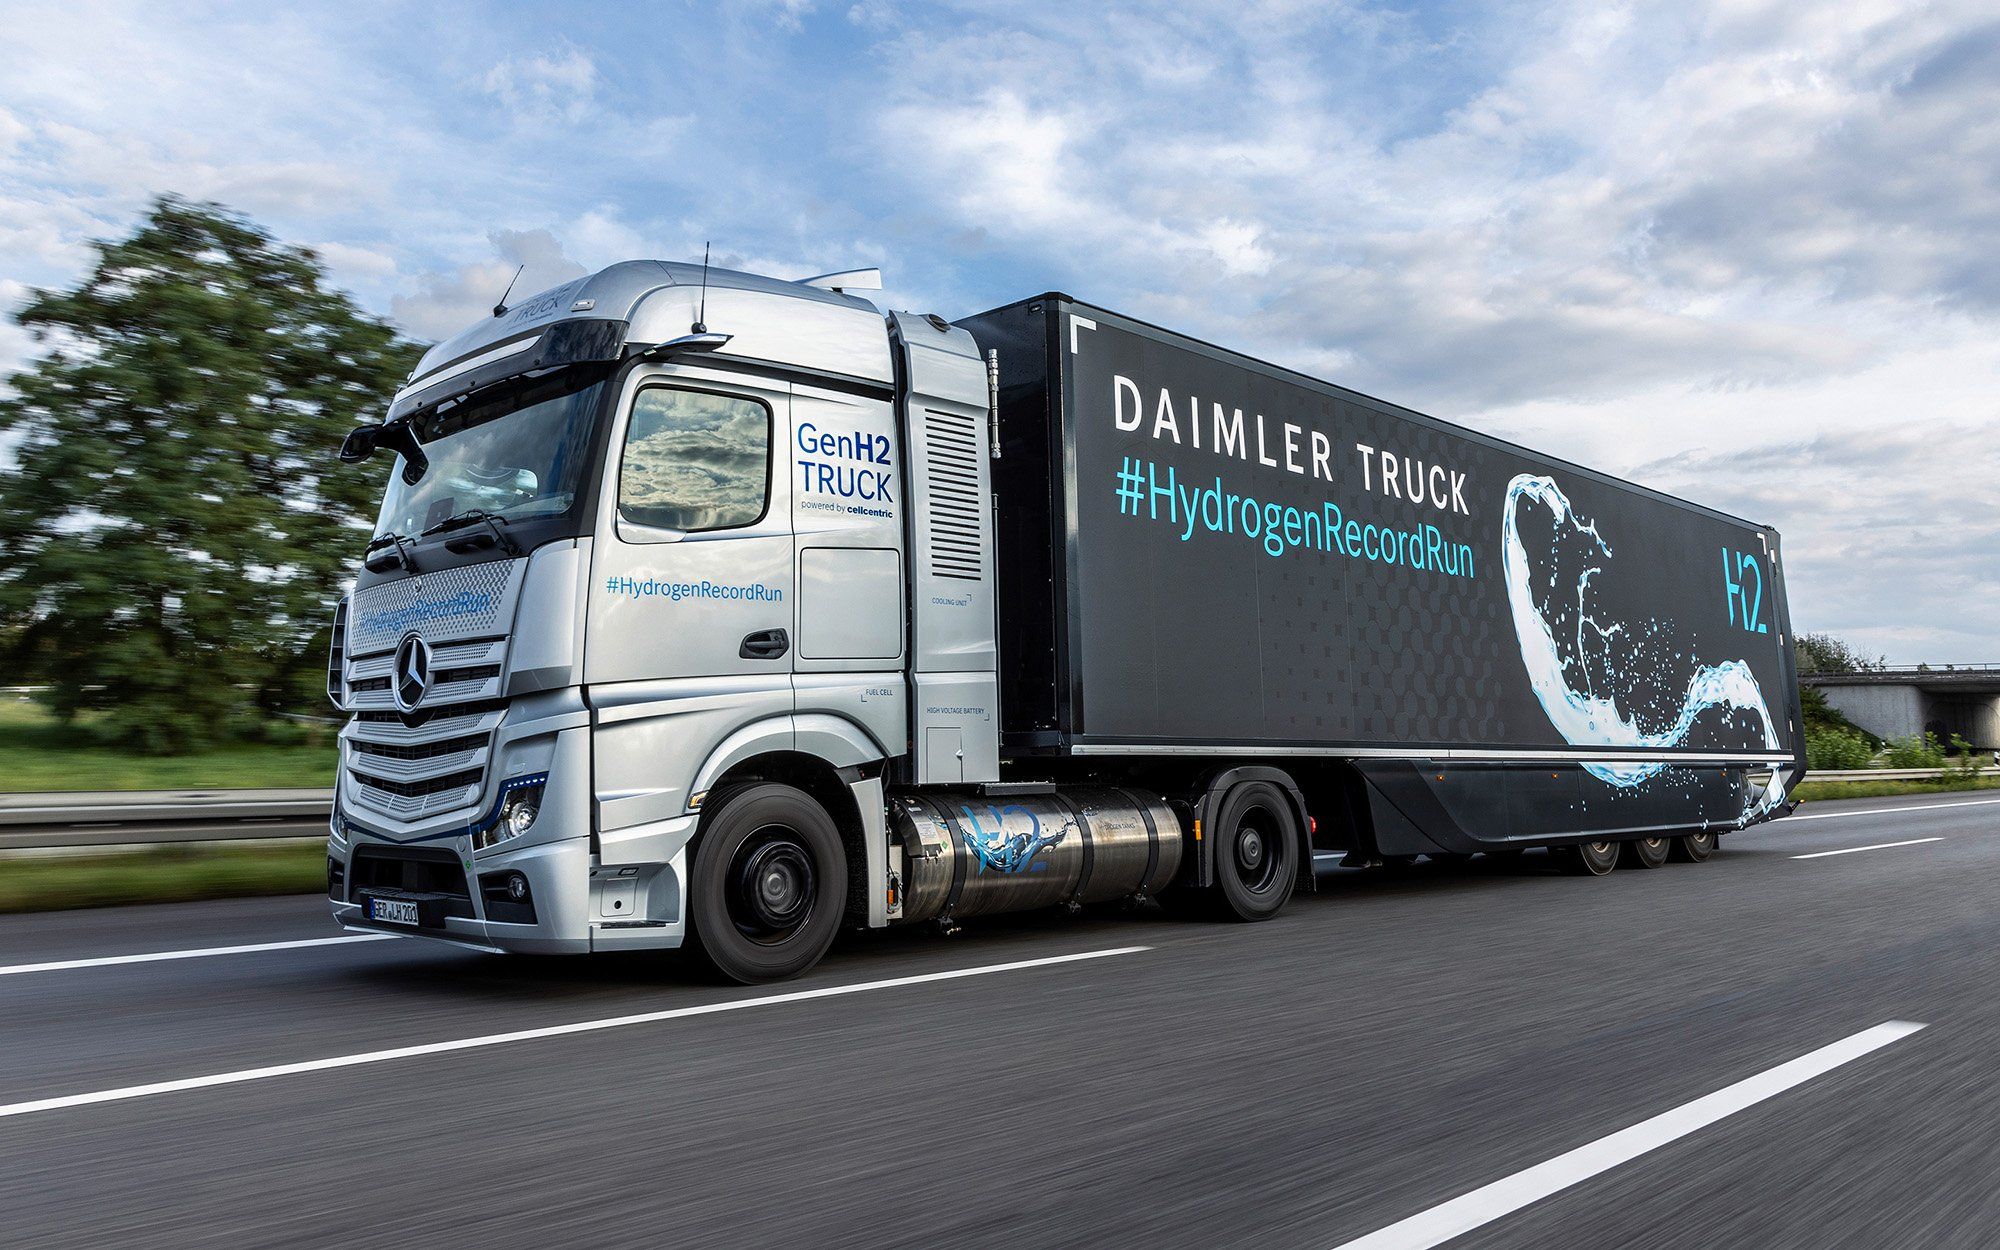 A grey and black semi truck on a highway is covered with branding for GenH2 Daimler Truck